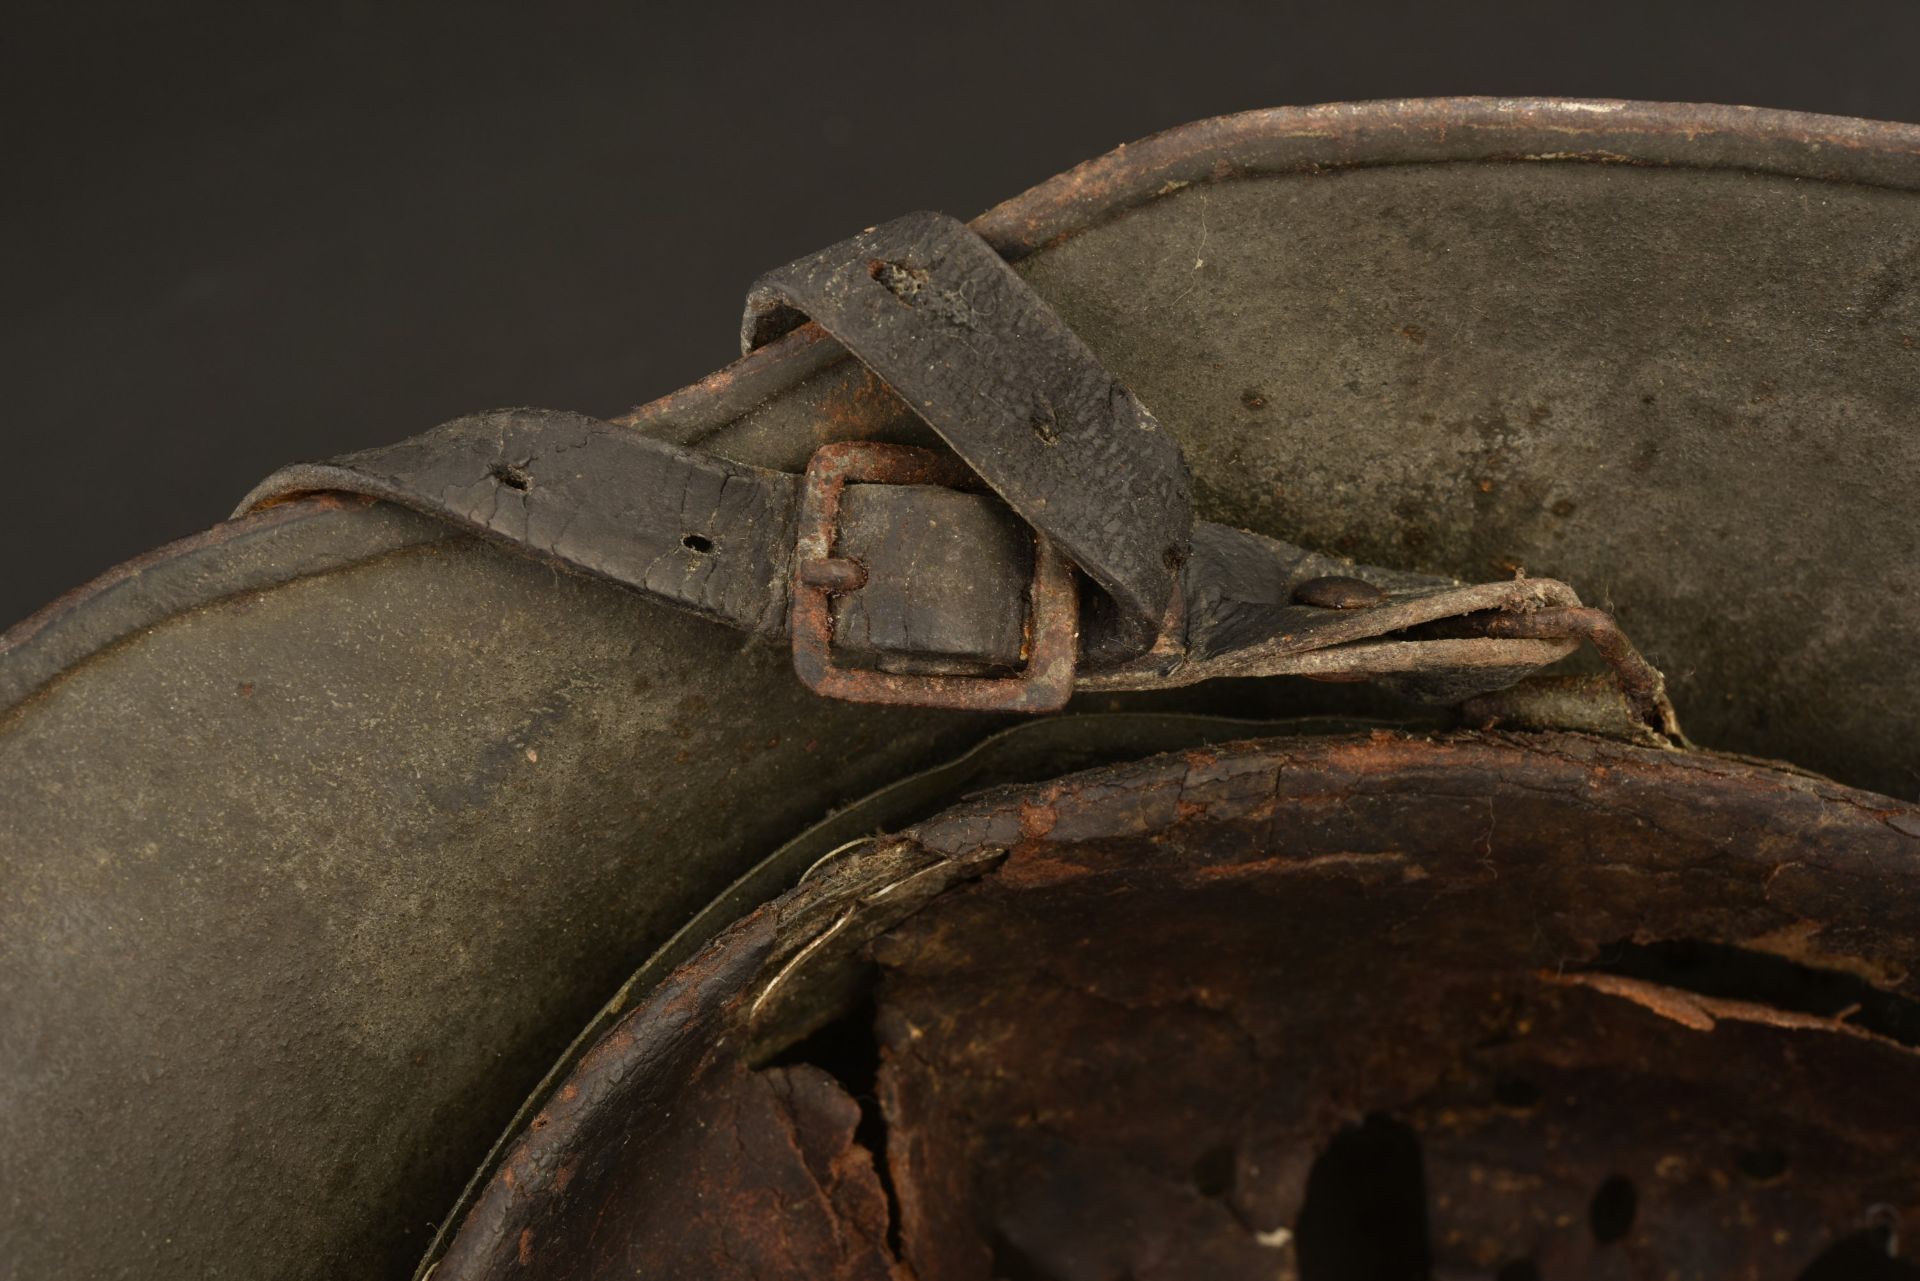 Casque WWI reconditionne. Refurbished WWI helmet. - Image 3 of 9